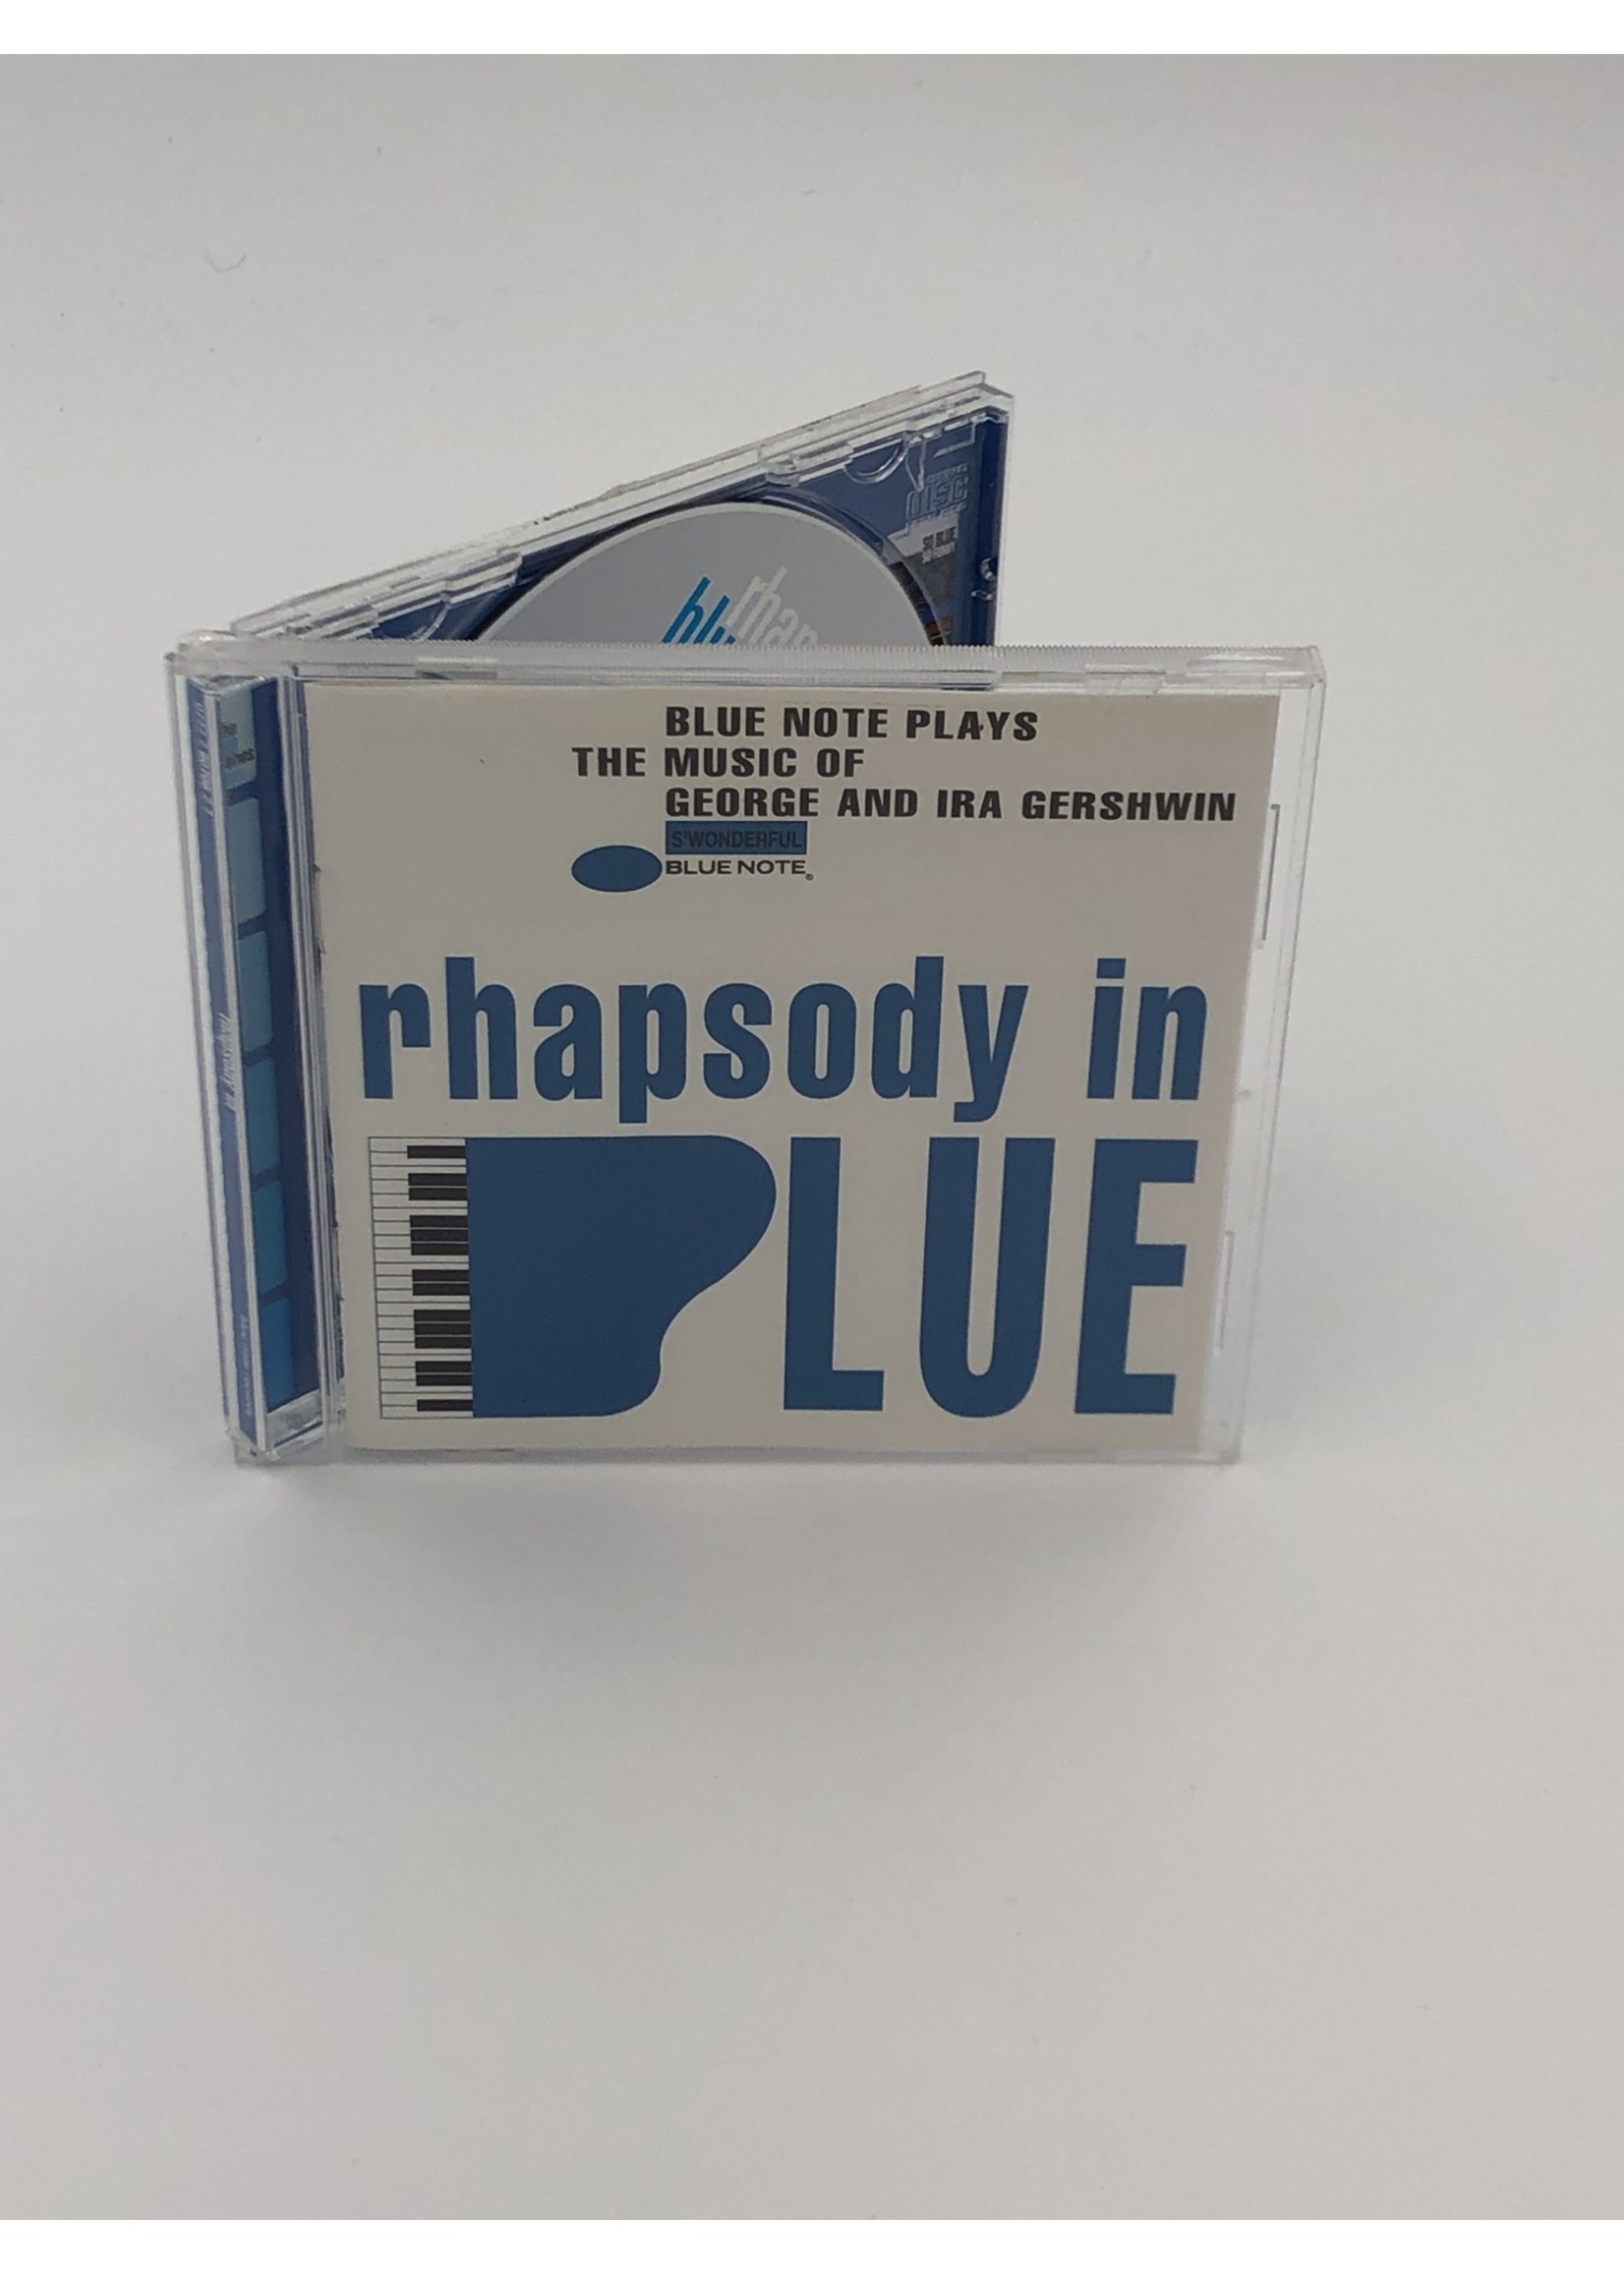 CD Rhapsody in Blue Blue Note plays the Music of George and Ira Gershwin CD